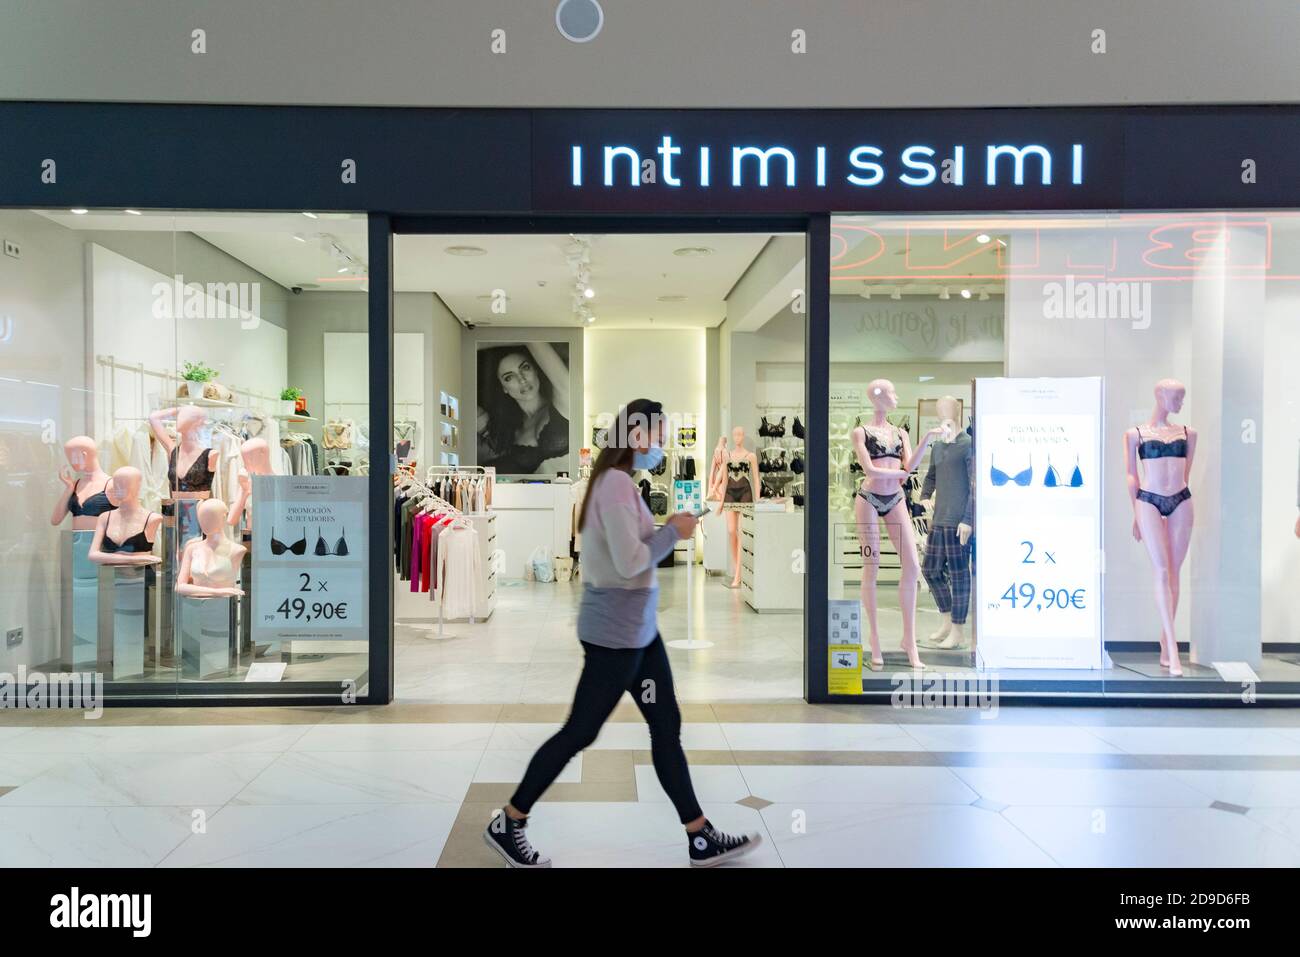 https://c8.alamy.com/comp/2D9D6FB/valencia-spain-4th-nov-2020-a-woman-with-a-mask-walking-in-front-of-the-intimissimi-store-during-the-state-of-alarm-at-the-osito-la-eliana-shopping-center-credit-xisco-navarrosopa-imageszuma-wirealamy-live-news-2D9D6FB.jpg